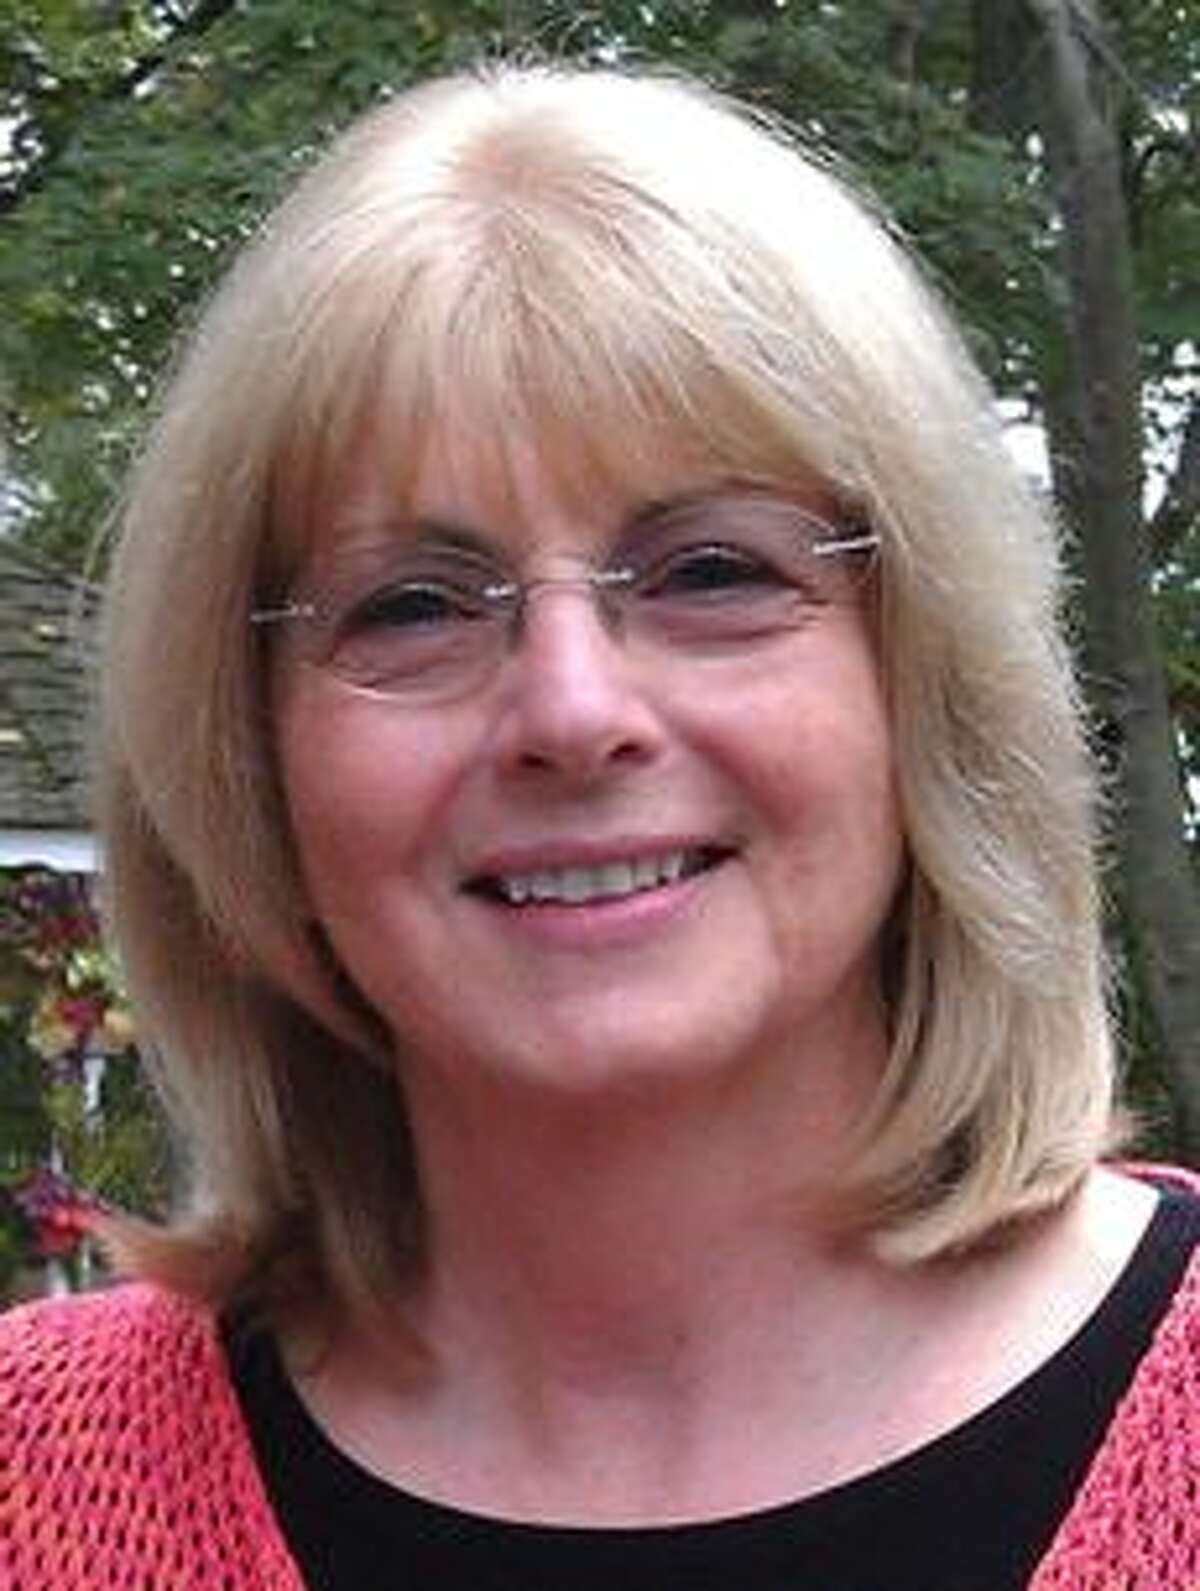 Claire Furano worked for the town of Wilton for nearly 18 years as an administrative assistant. On Tuesday, July 5, Furano will retire from her position with the town and will move down to Florida with her husband, Jack Furano.